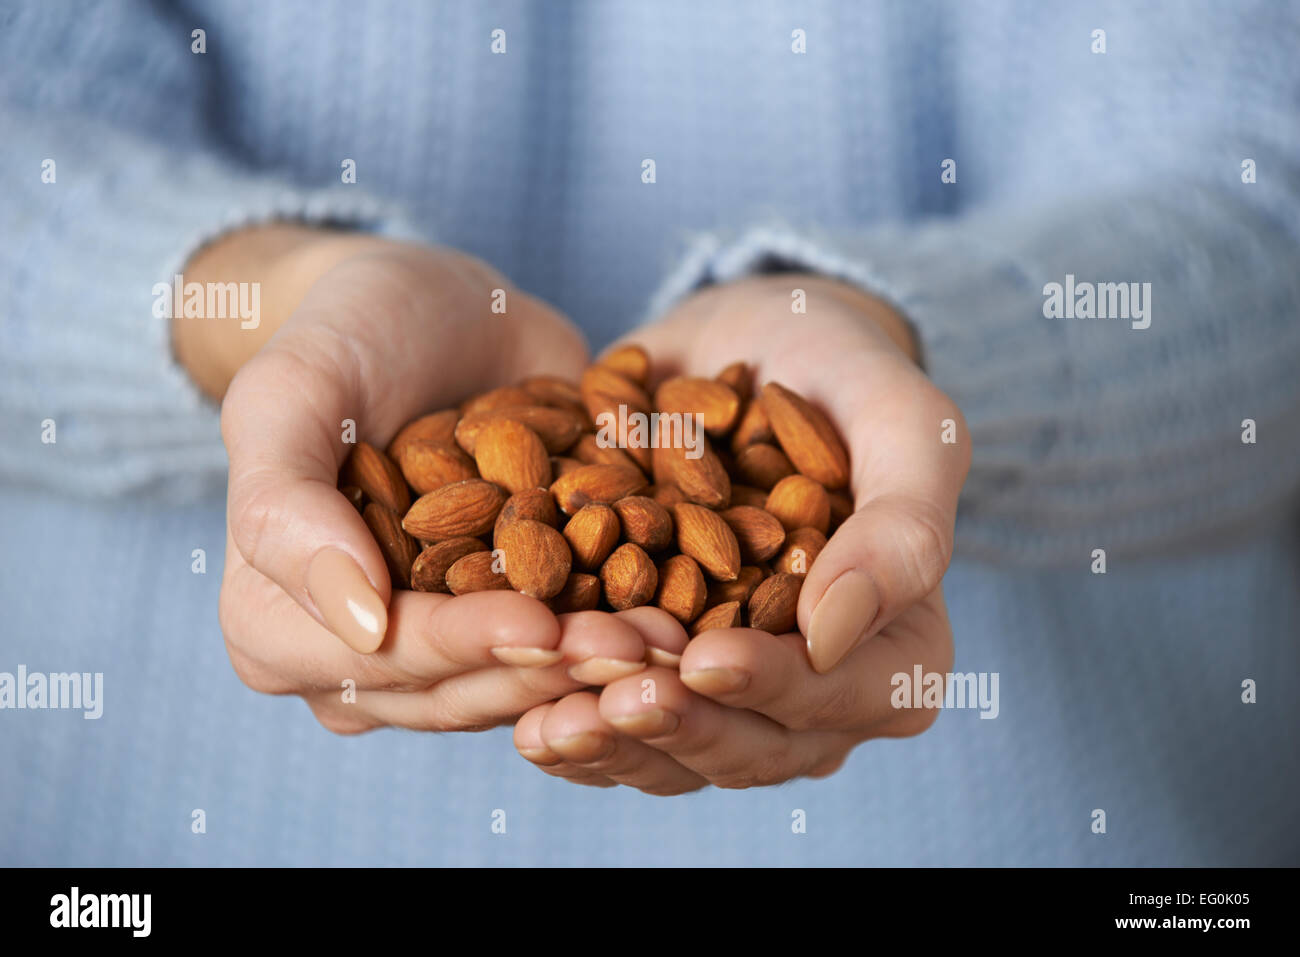 Close Up Of Woman Holding Handful Of Almonds Stock Photo